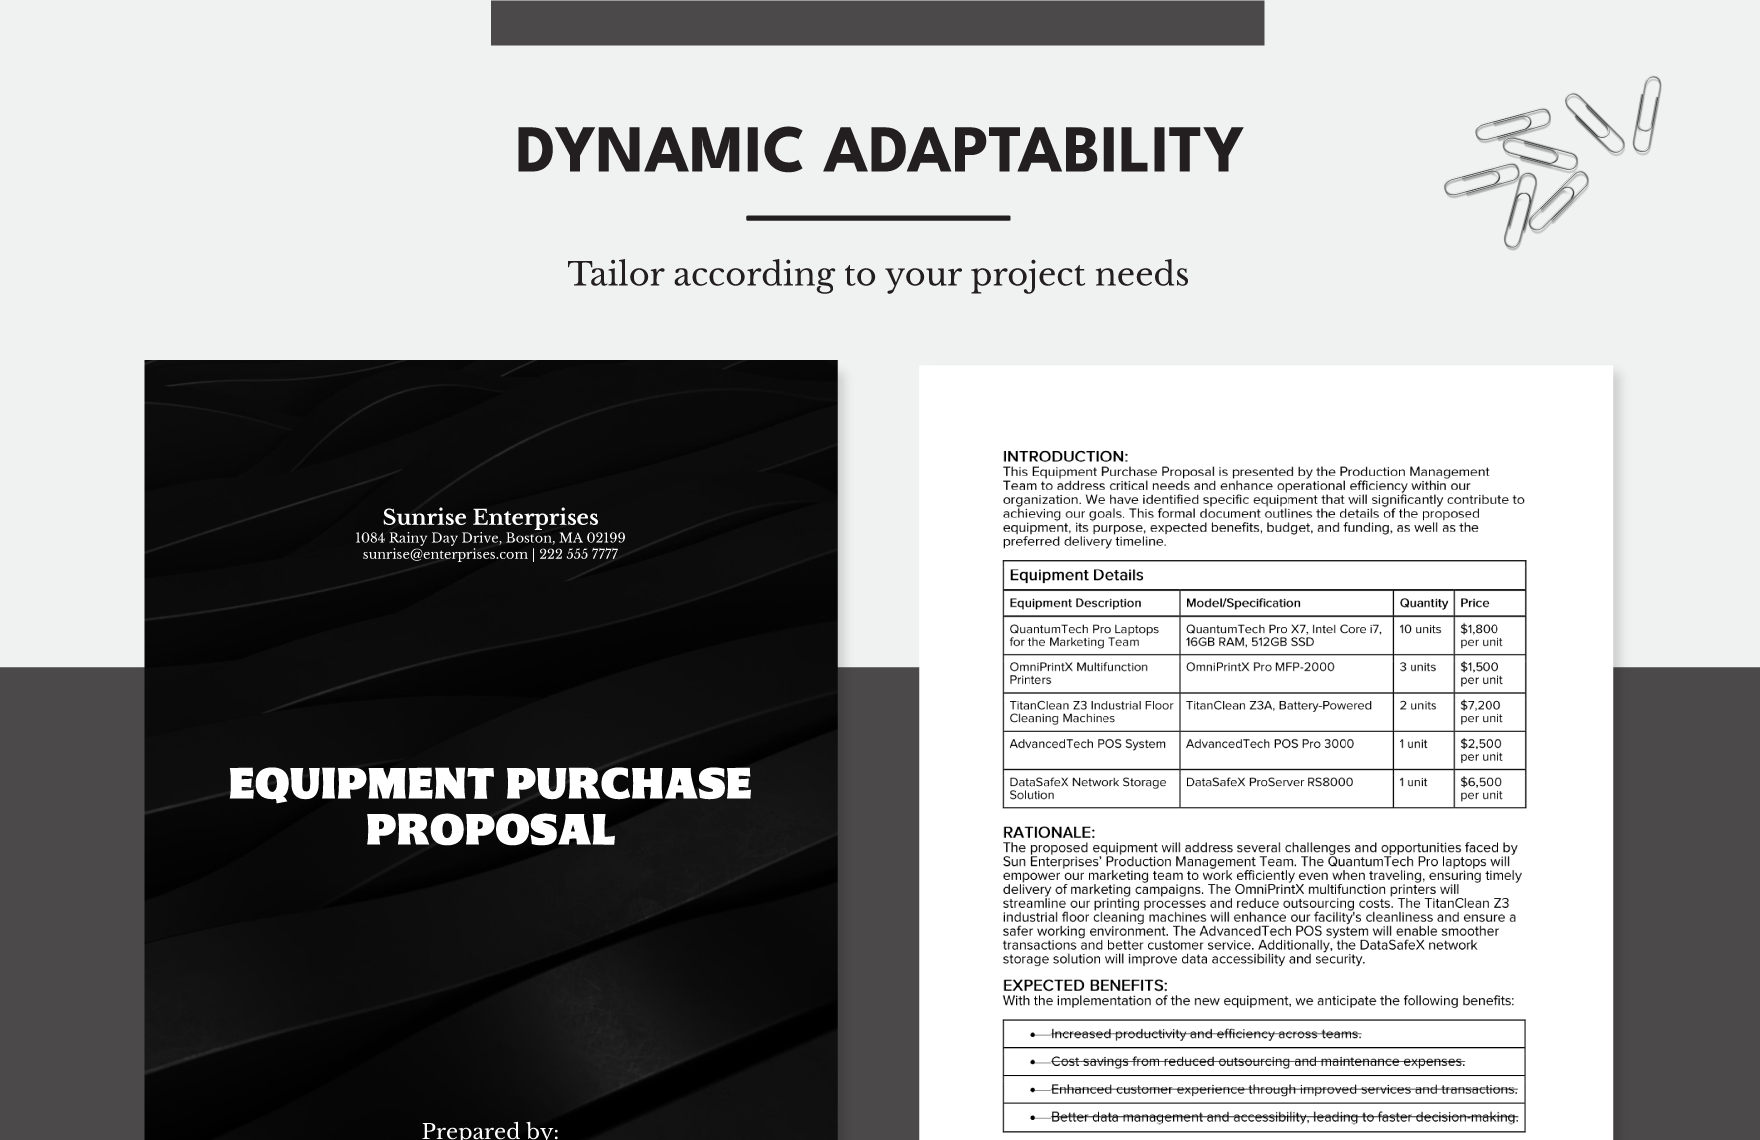 Equipment Purchase Proposal Template